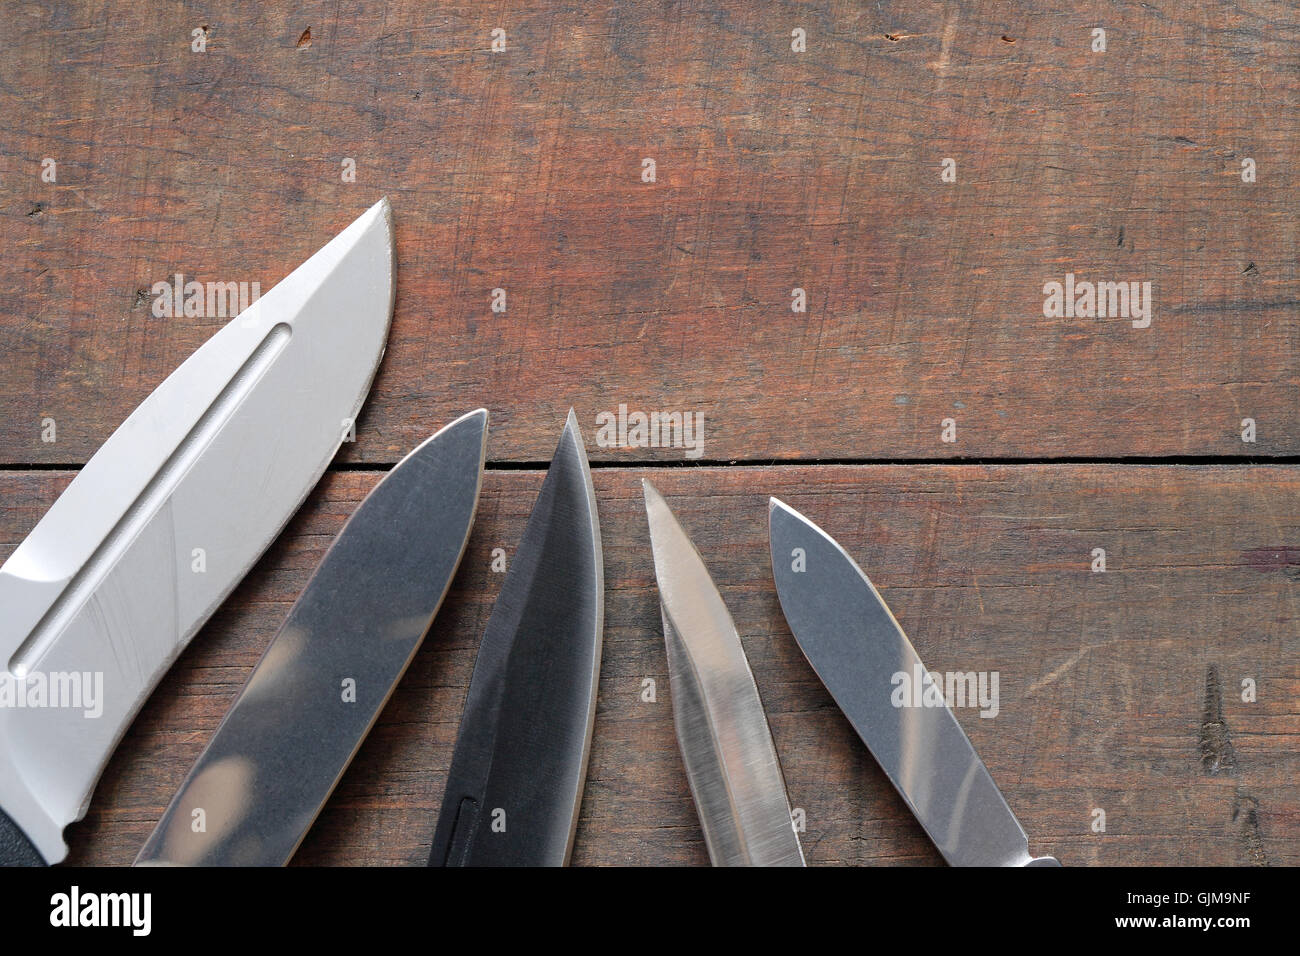 Knives On Wood Stock Photo